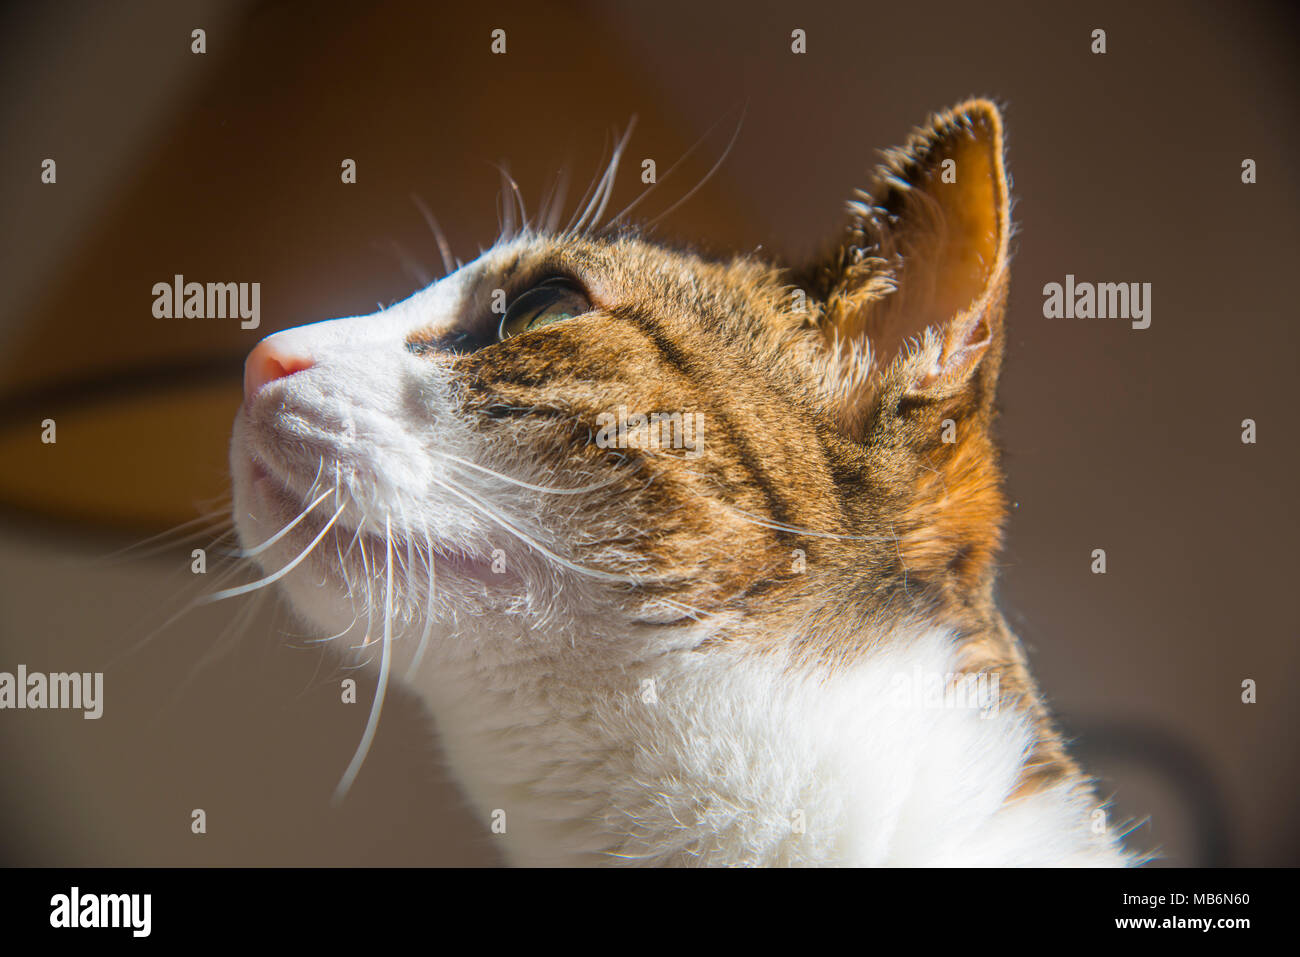 Profile portrait of tabby and white cat. Close view. Stock Photo